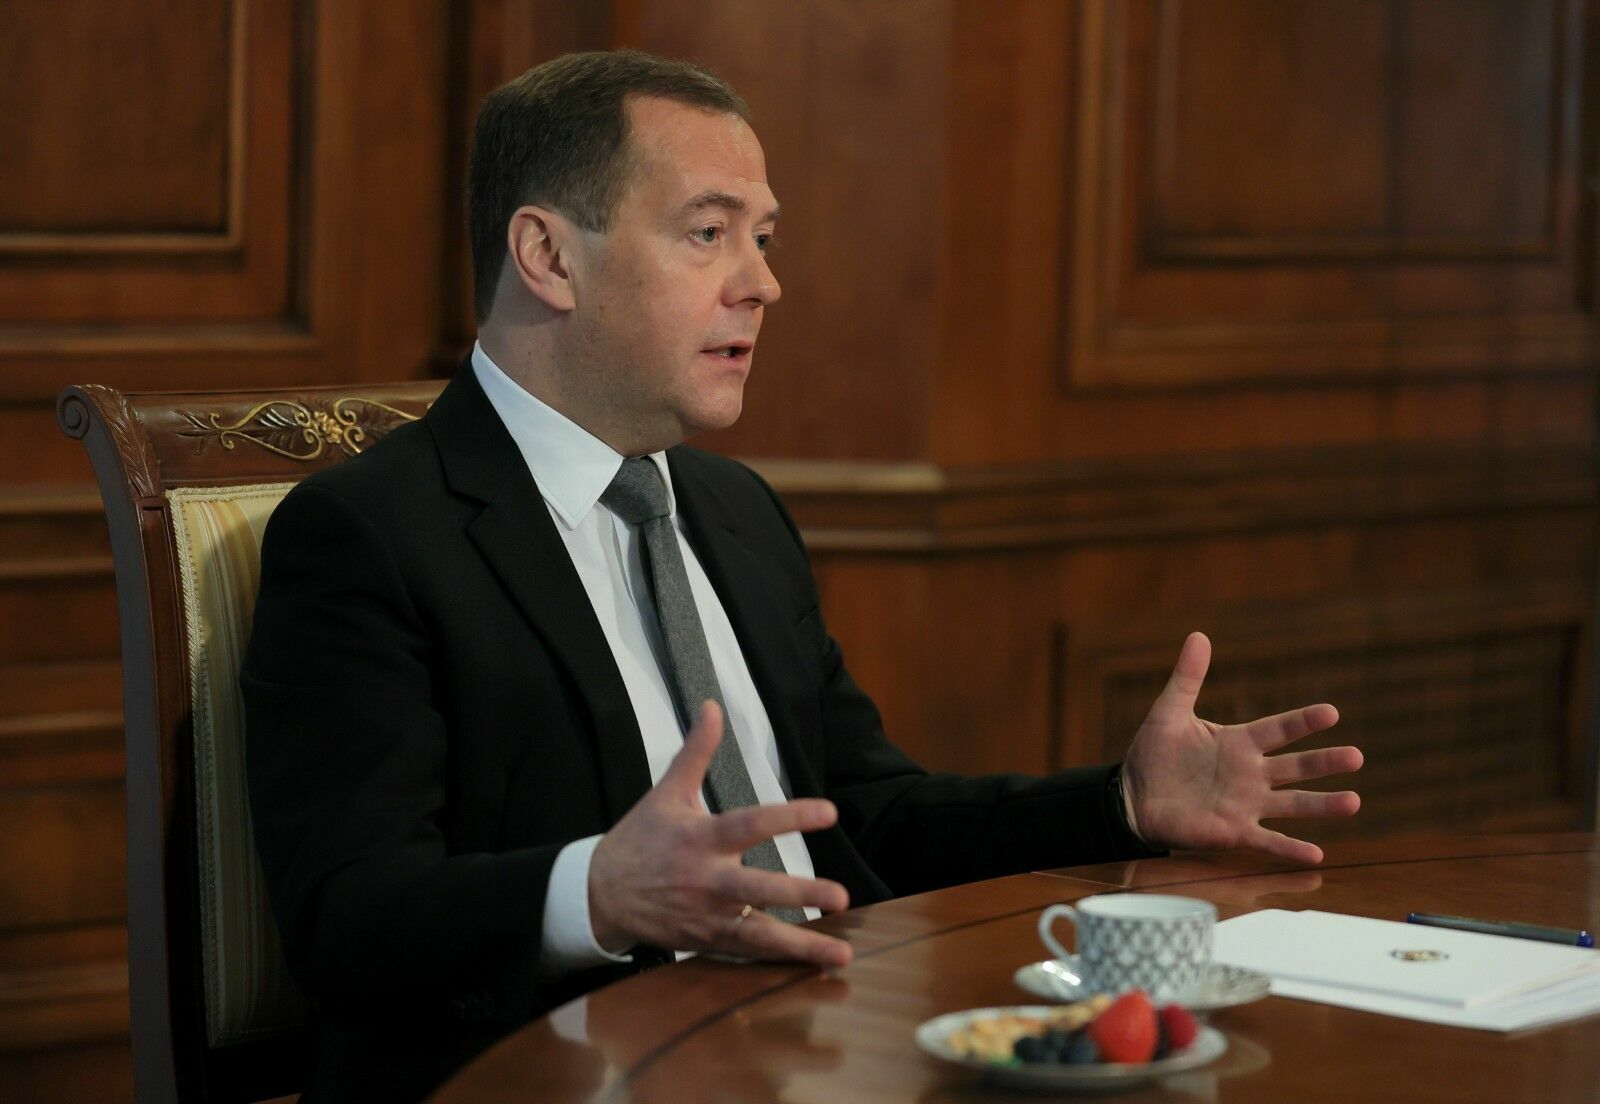 Medvedev spoke about "sloppiness" during mobilization in Russia